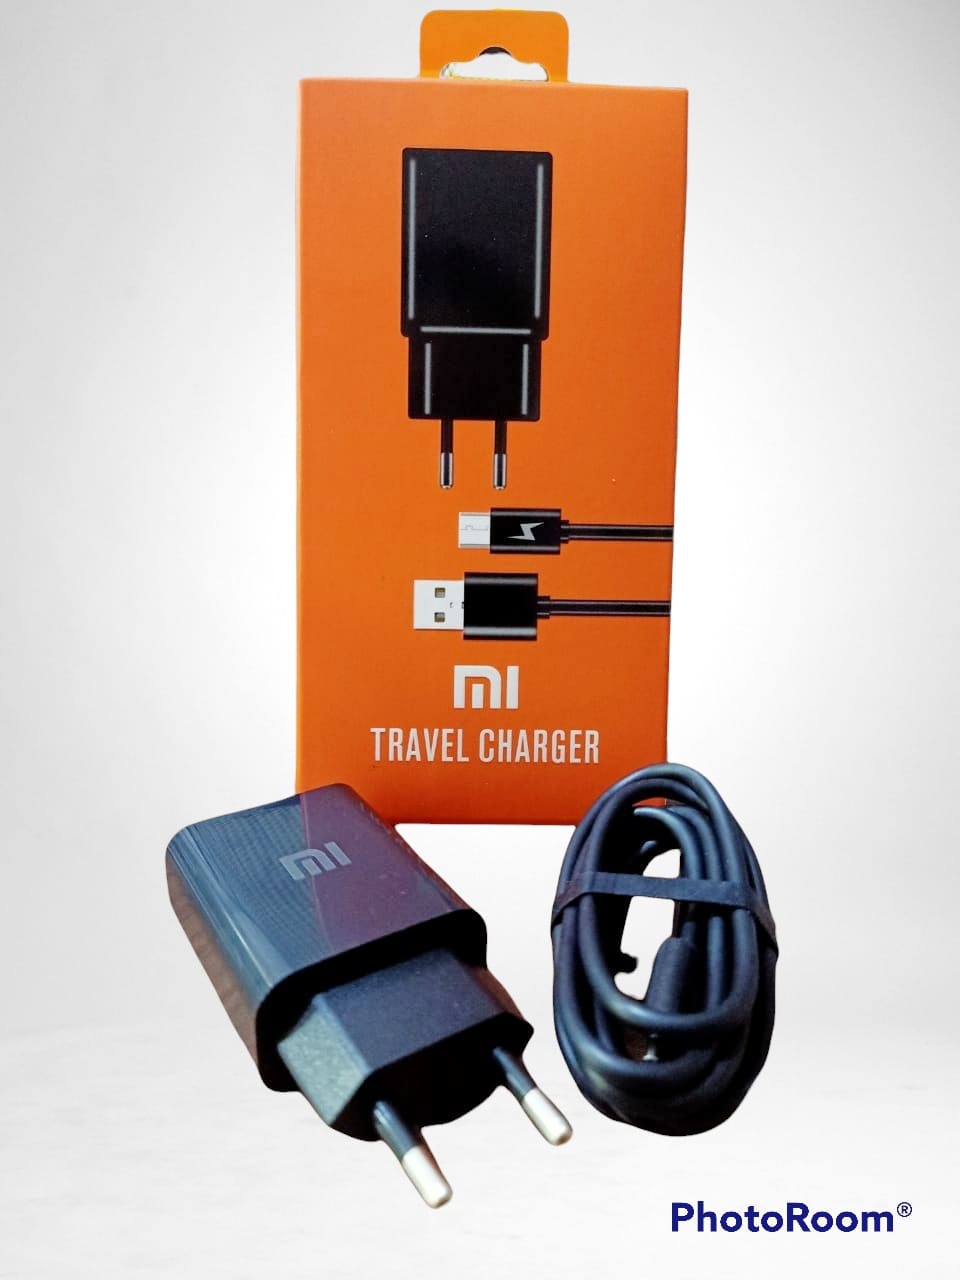 TRAVEL CHARGER XIAOMI MI4 MICRO (DL)